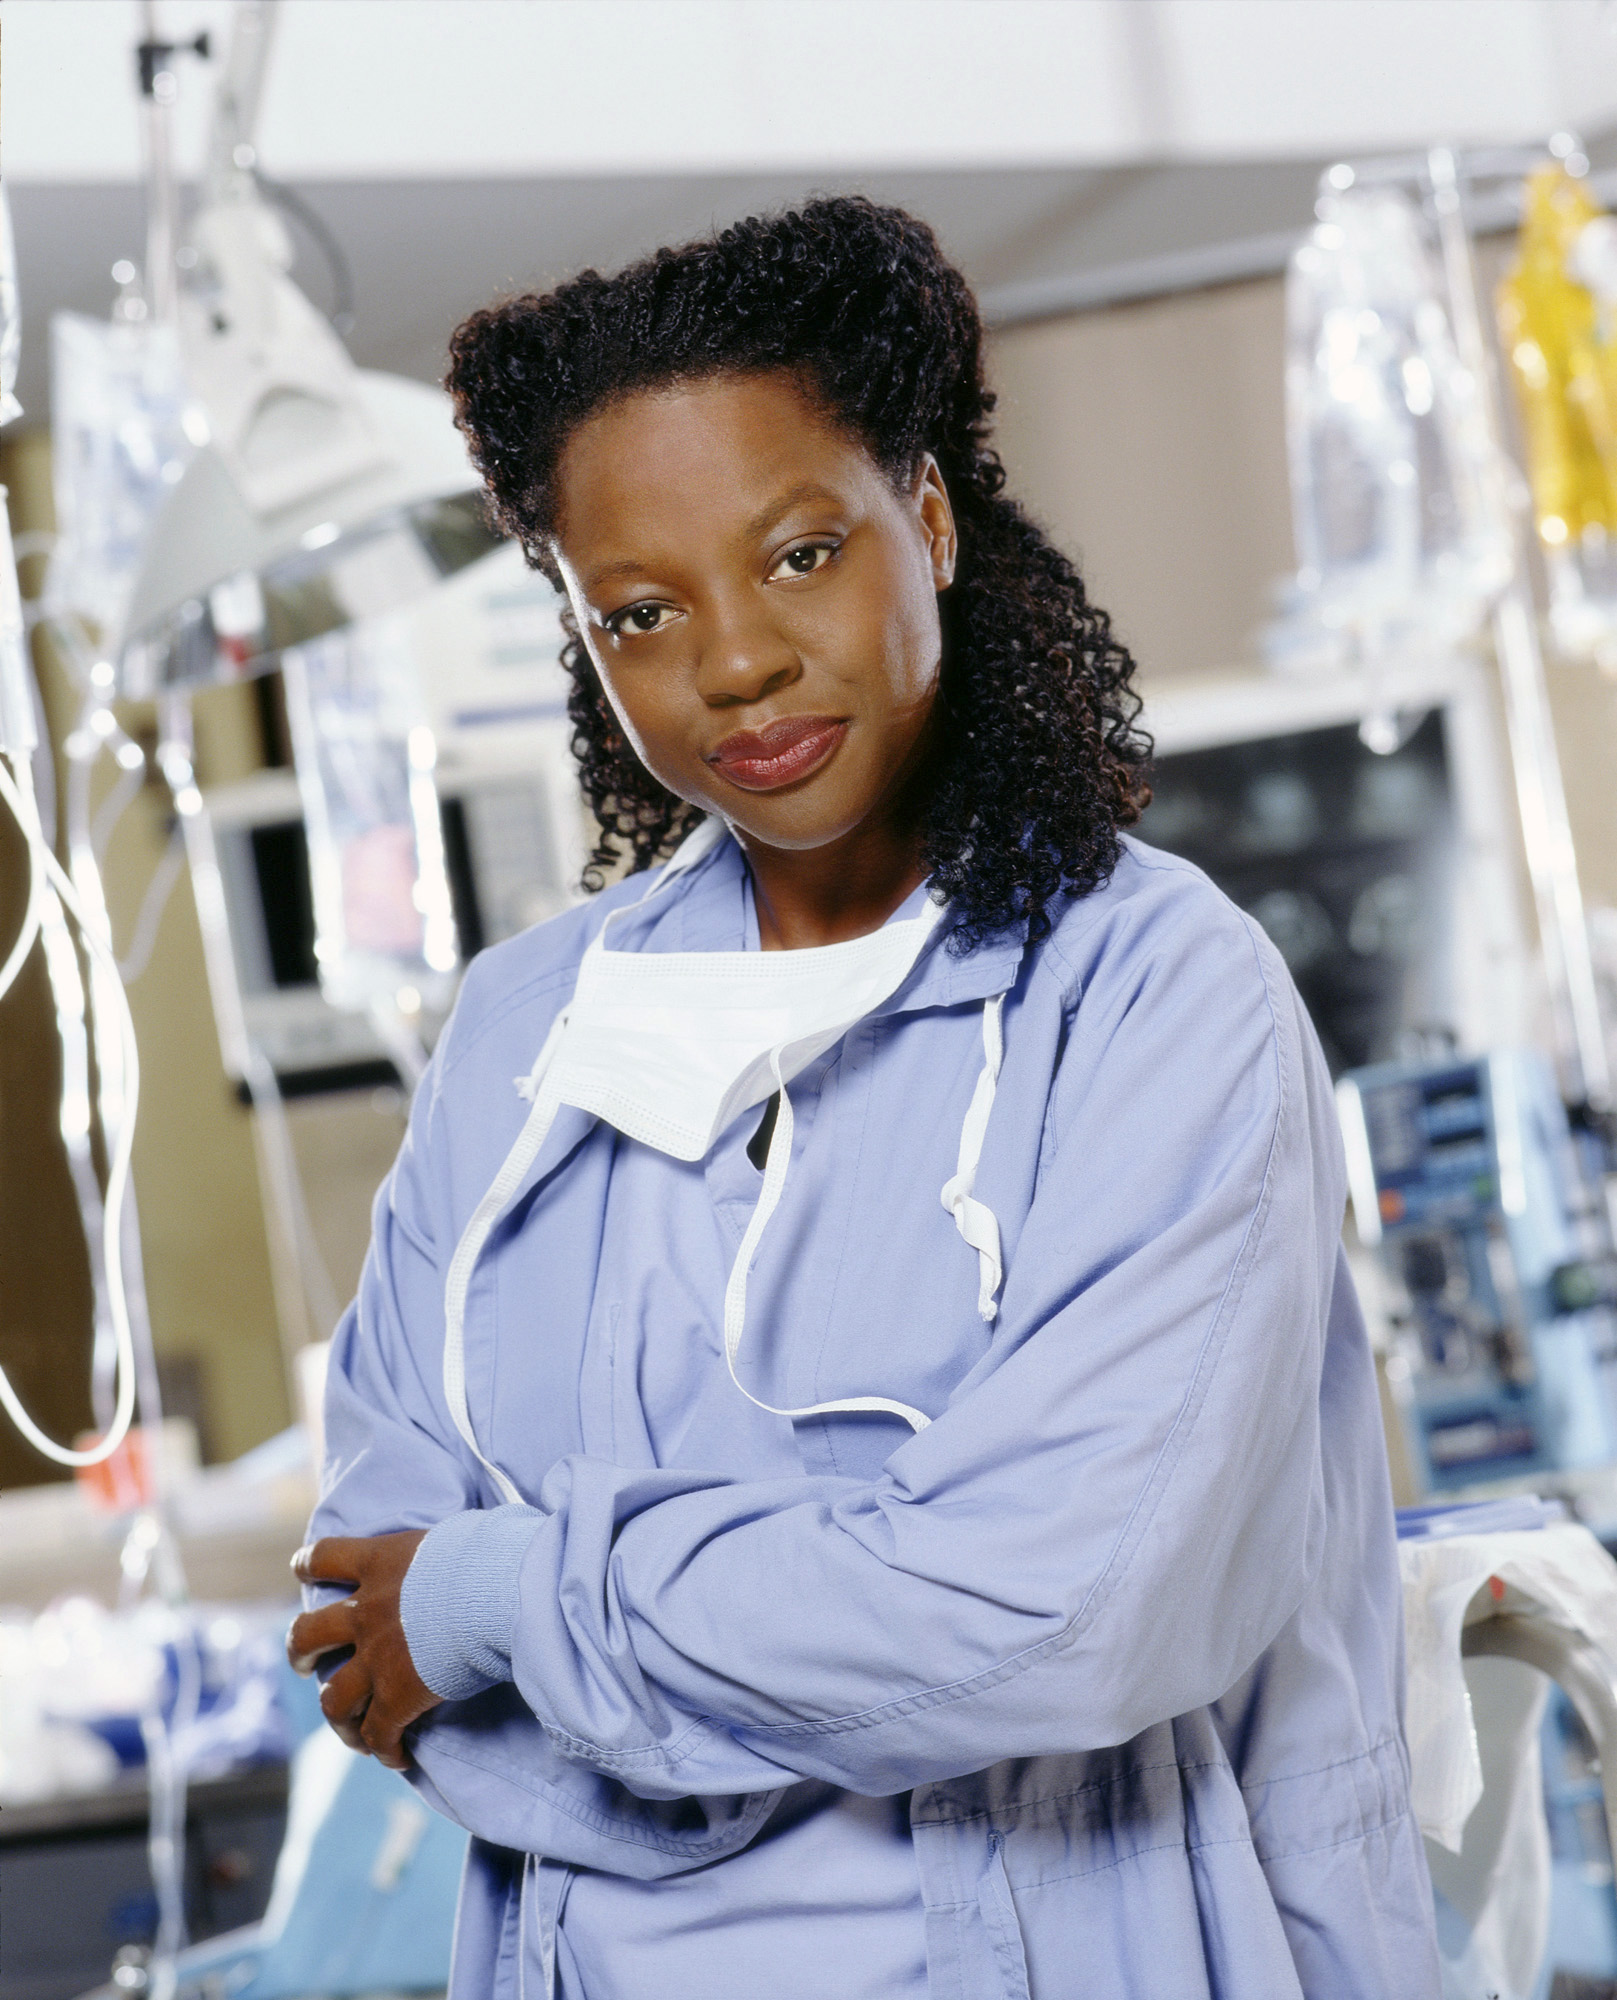 Viola Davis playing the role of Nurse Lynette Peeler on "City of Angels" in 1999 | Source: Getty Images